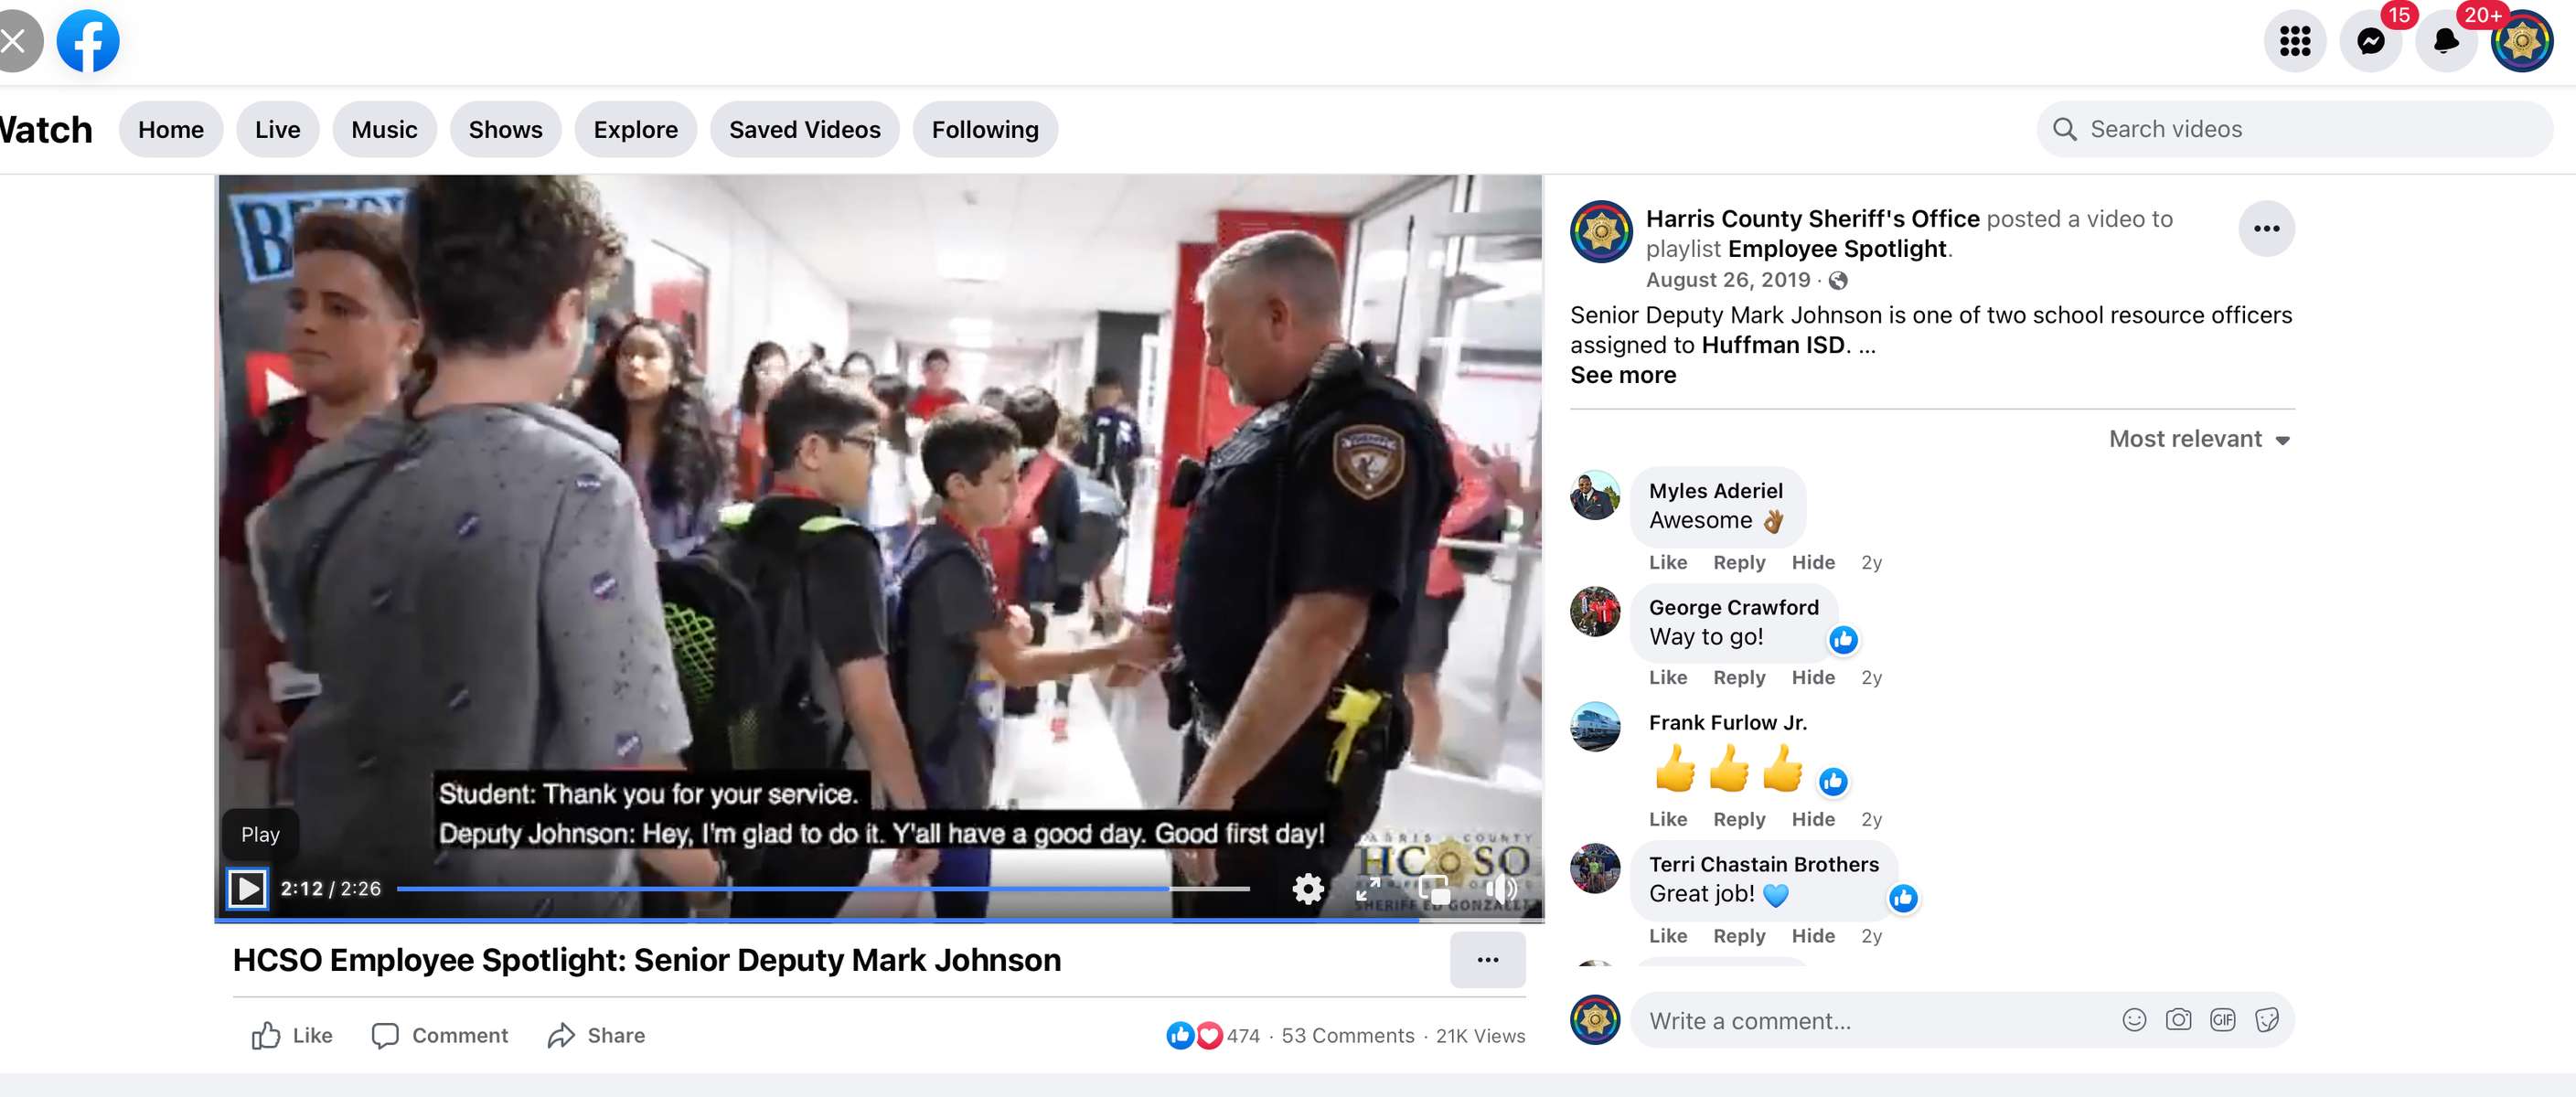 https://fb.watch/drQXEPHceF/https://www.instagram.com/tv/B1oaIsEAHvU/?utm_source=ig_web_copy_linkSenior Deputy Mark Johnson is one of two school resource officers assigned to Huffman ISD.{quote}Working in schools, a lot of times the only time that students come in contact with law enforcement is with that school resource officer that’s assigned to their school,” said Johnson.{quote}They know you enough to know in passing that you’re someone they can trust when they do need help. Even indirectly it helps to forge relationships just by being there.”